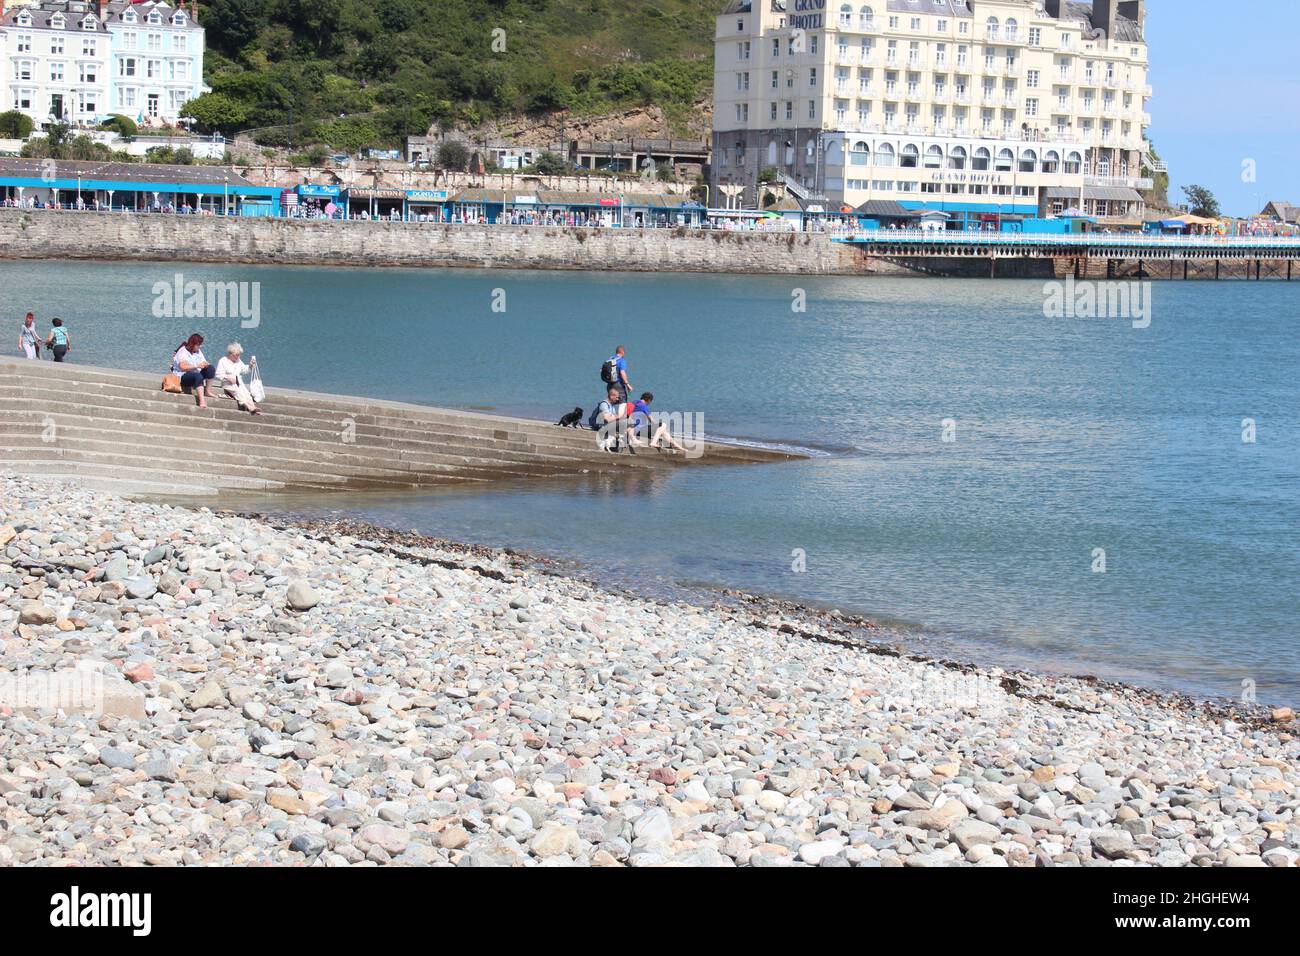 Llandudno is a coastal town in North Wales. Its known for its north shore beach and 19th century pier with shops and fun rides Stock Photo